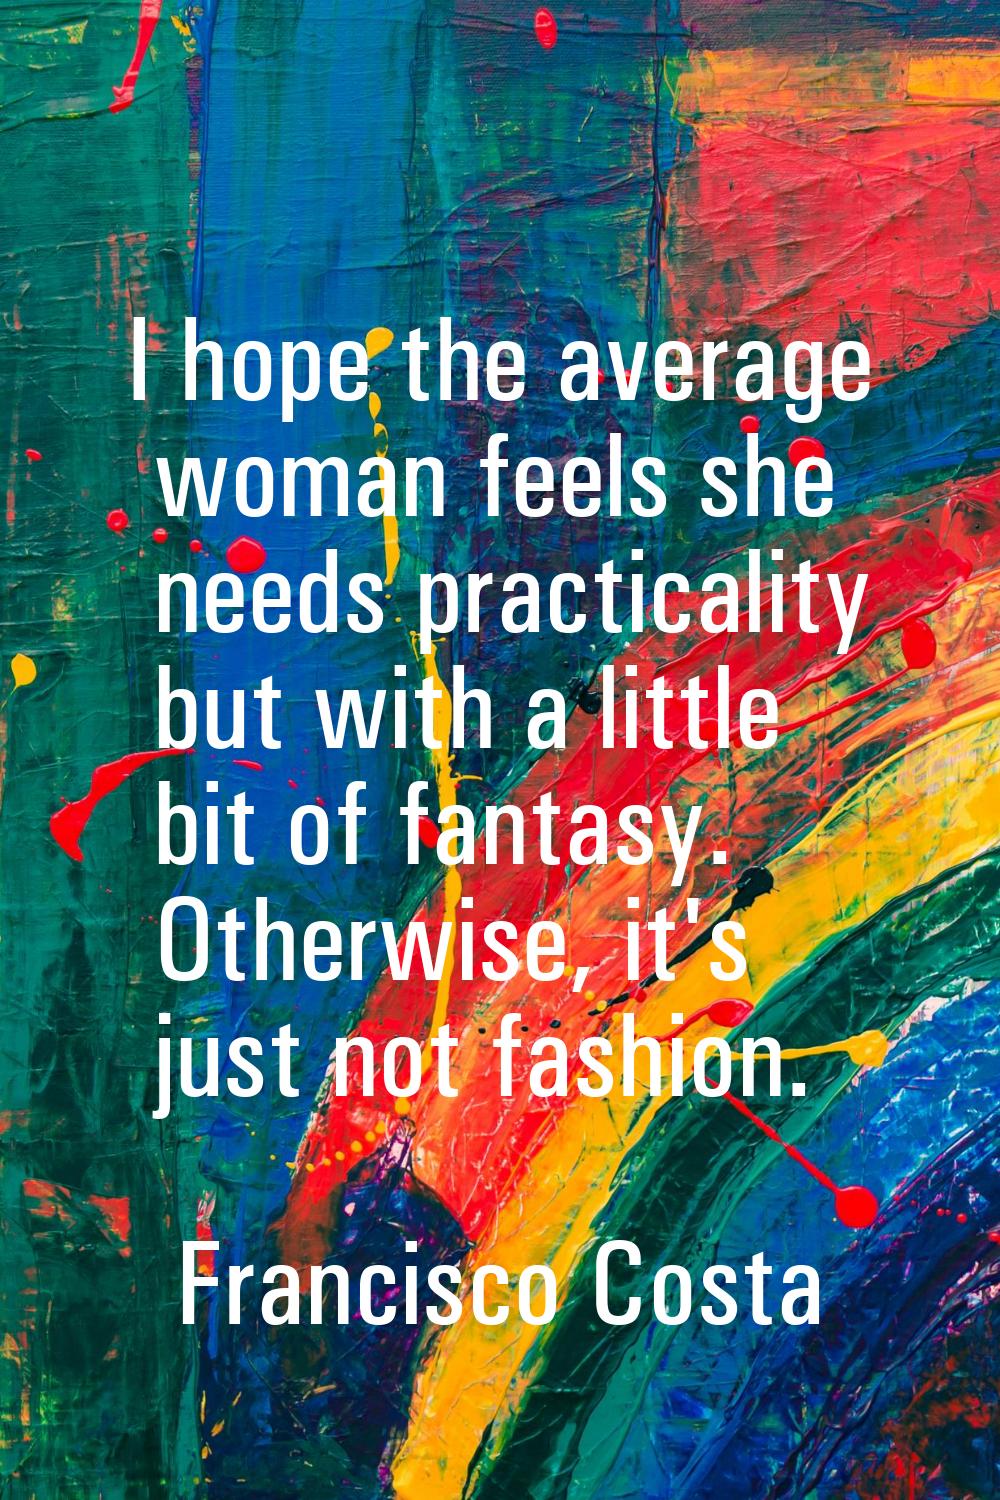 I hope the average woman feels she needs practicality but with a little bit of fantasy. Otherwise, 